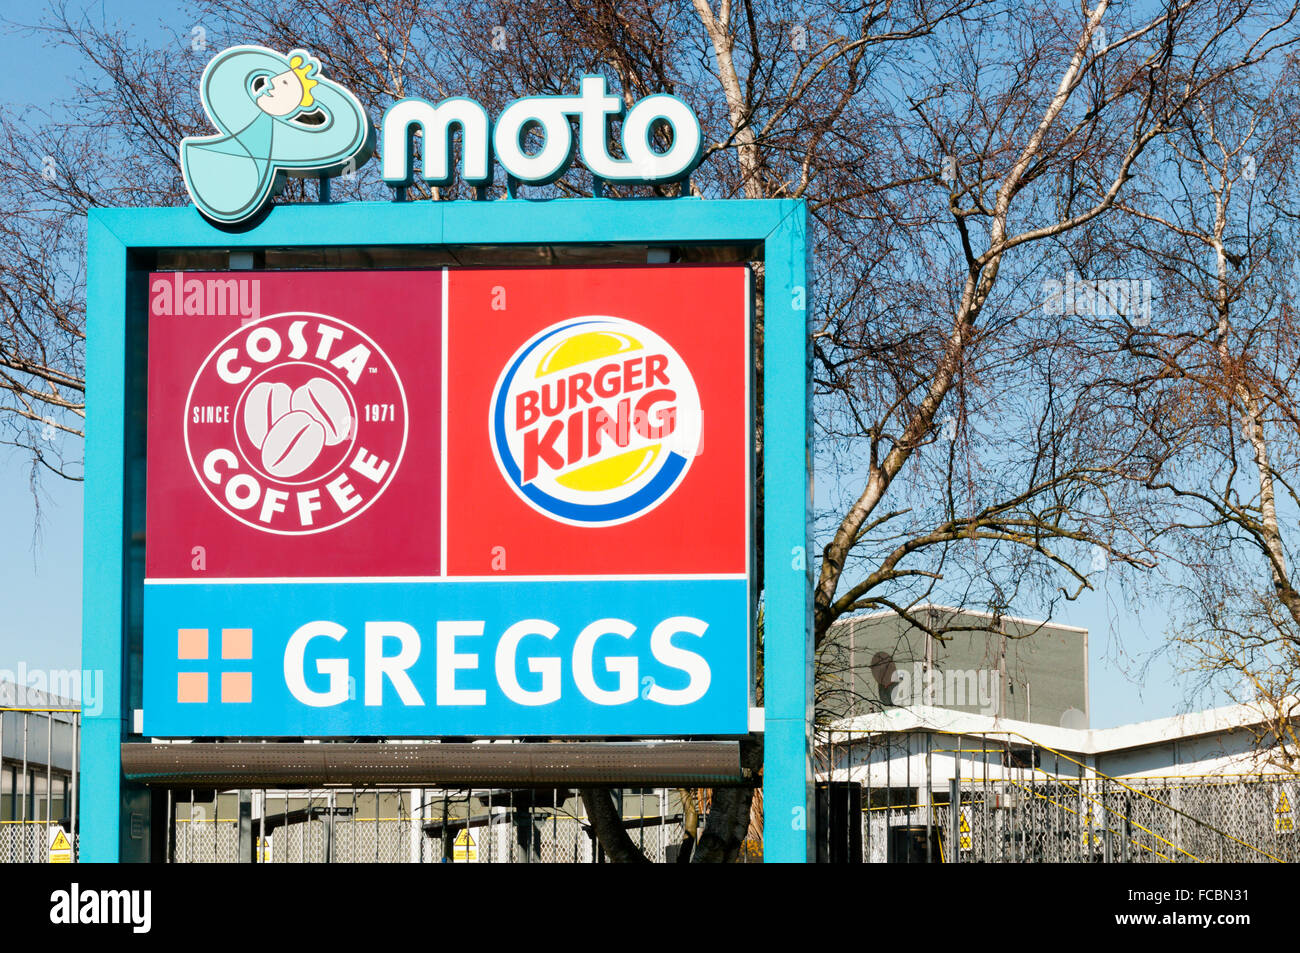 Sign for Costa Coffee, Burger King & Greggs at Moto service station in Medway Services at Farthing Corner on M2 motorway, Kent. Stock Photo